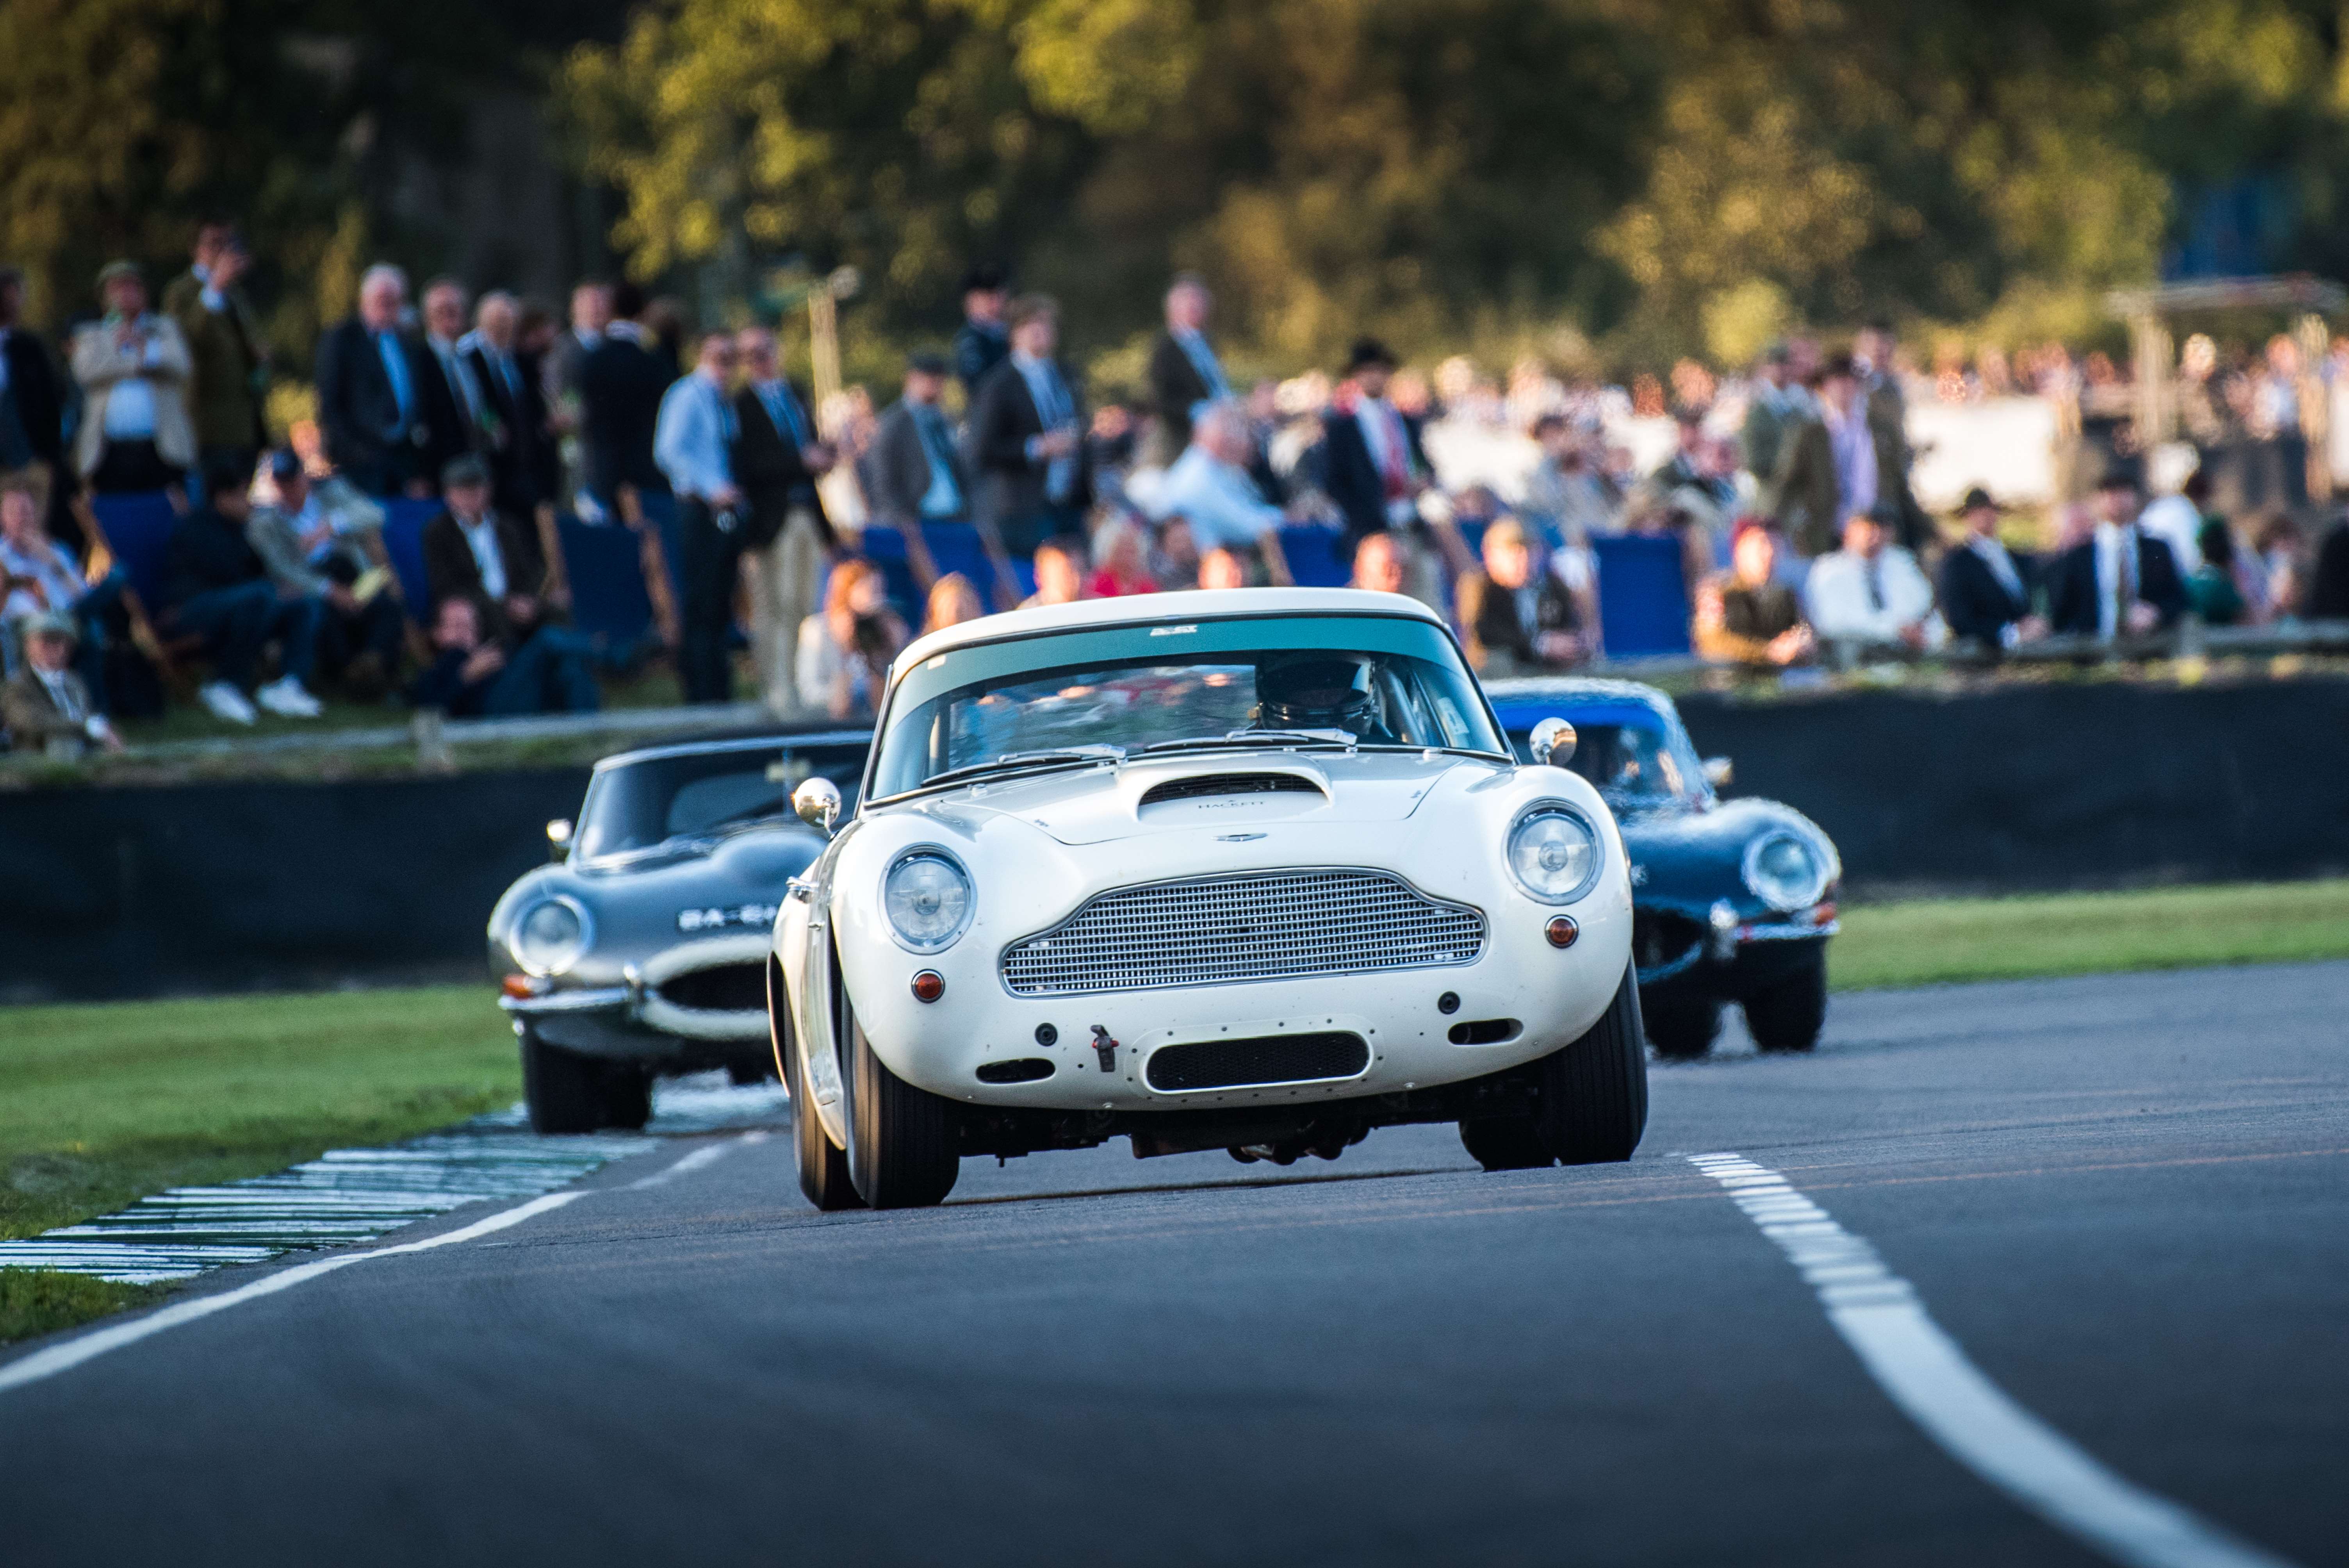 Goodwood Revival Cars On Track